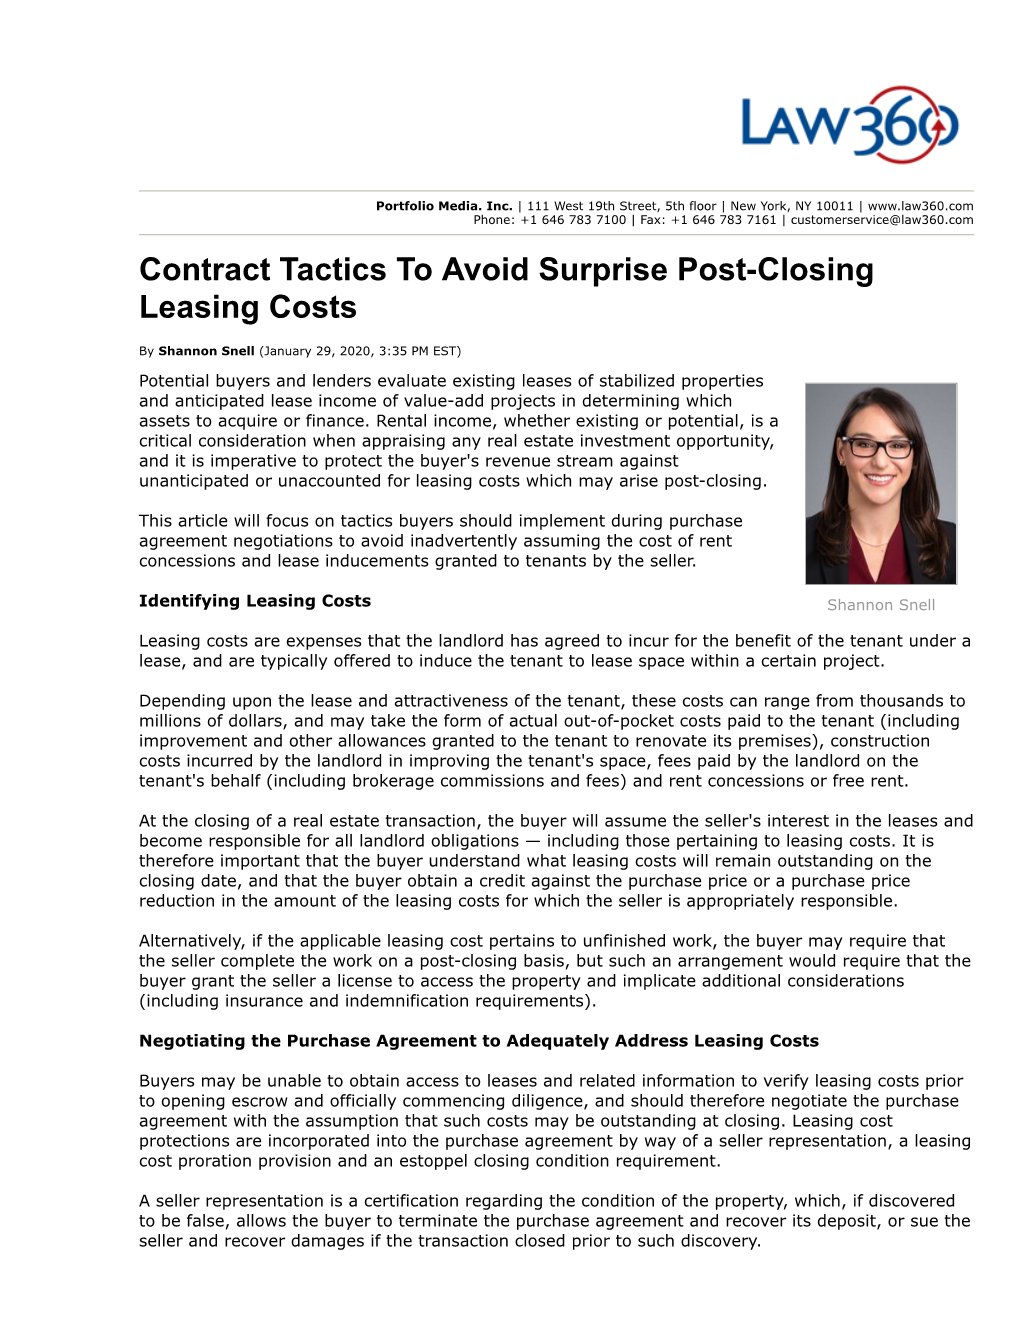 Contract Tactics to Avoid Surprise Post-Closing Leasing Costs